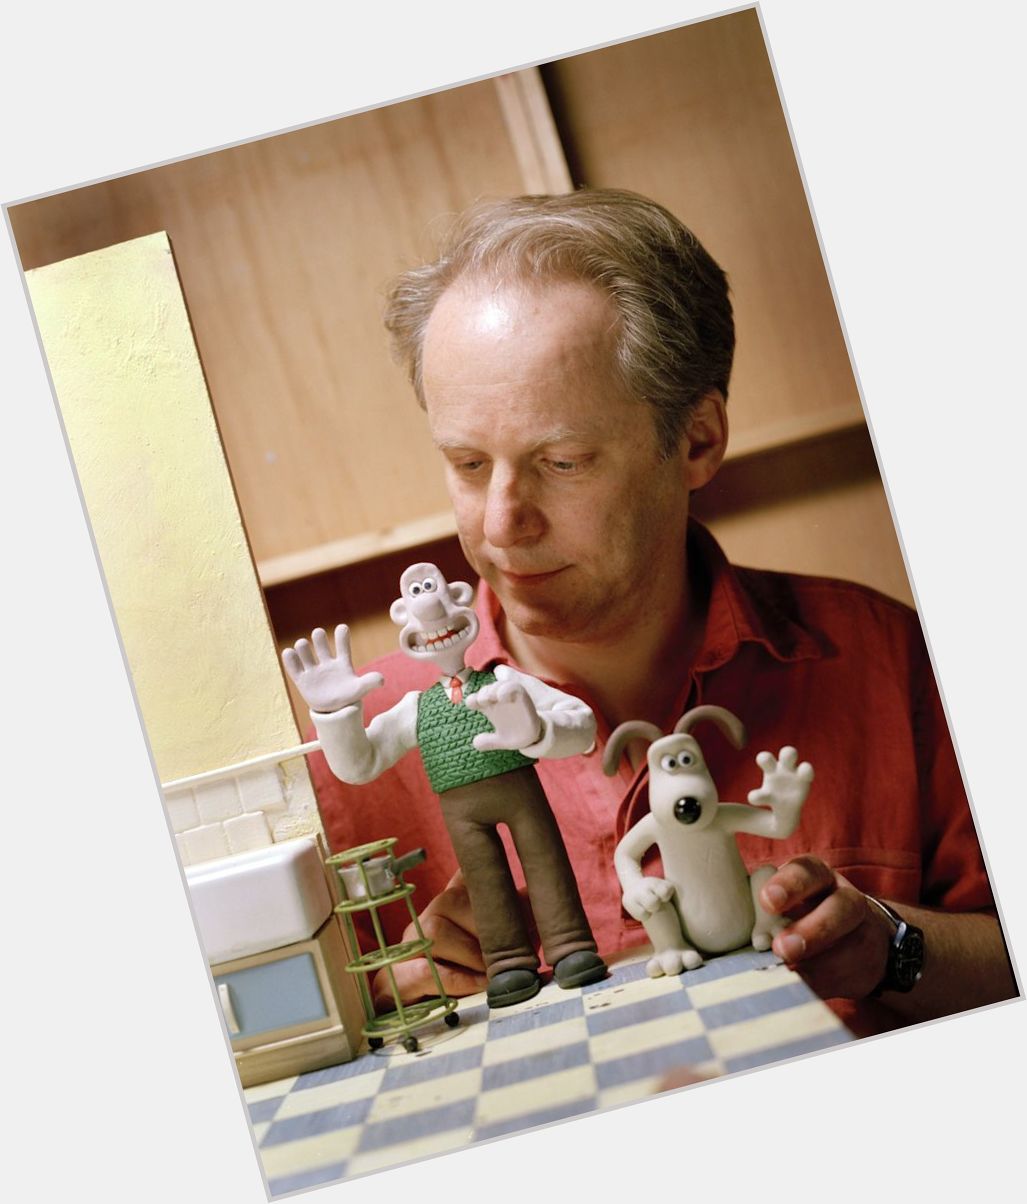 The animator, director and writer Nick Park celebrates his 60th birthday today. 

Many happy returns Nick! 